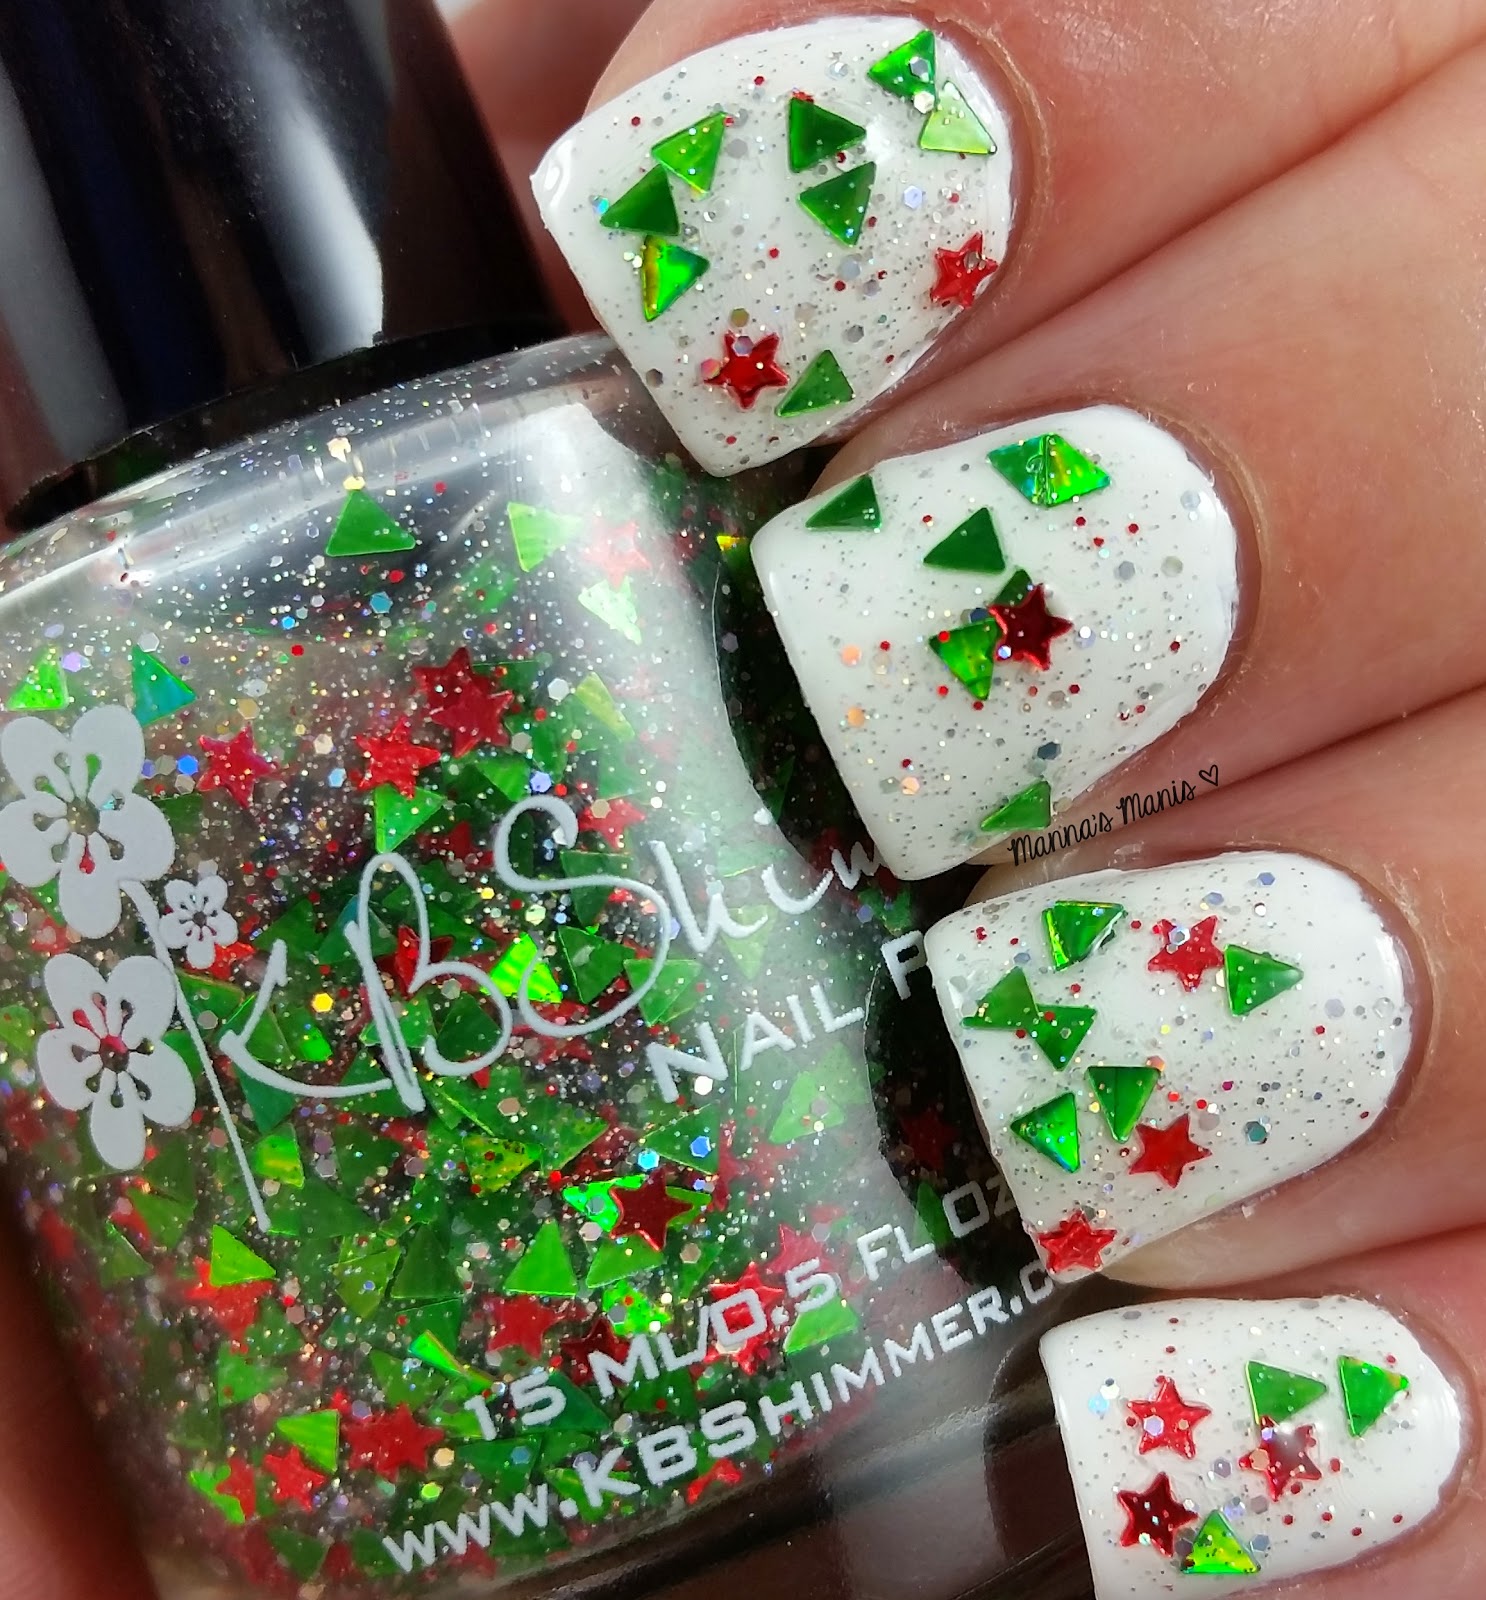 kbshimmer pineing for yule, a multicolored glitter topper